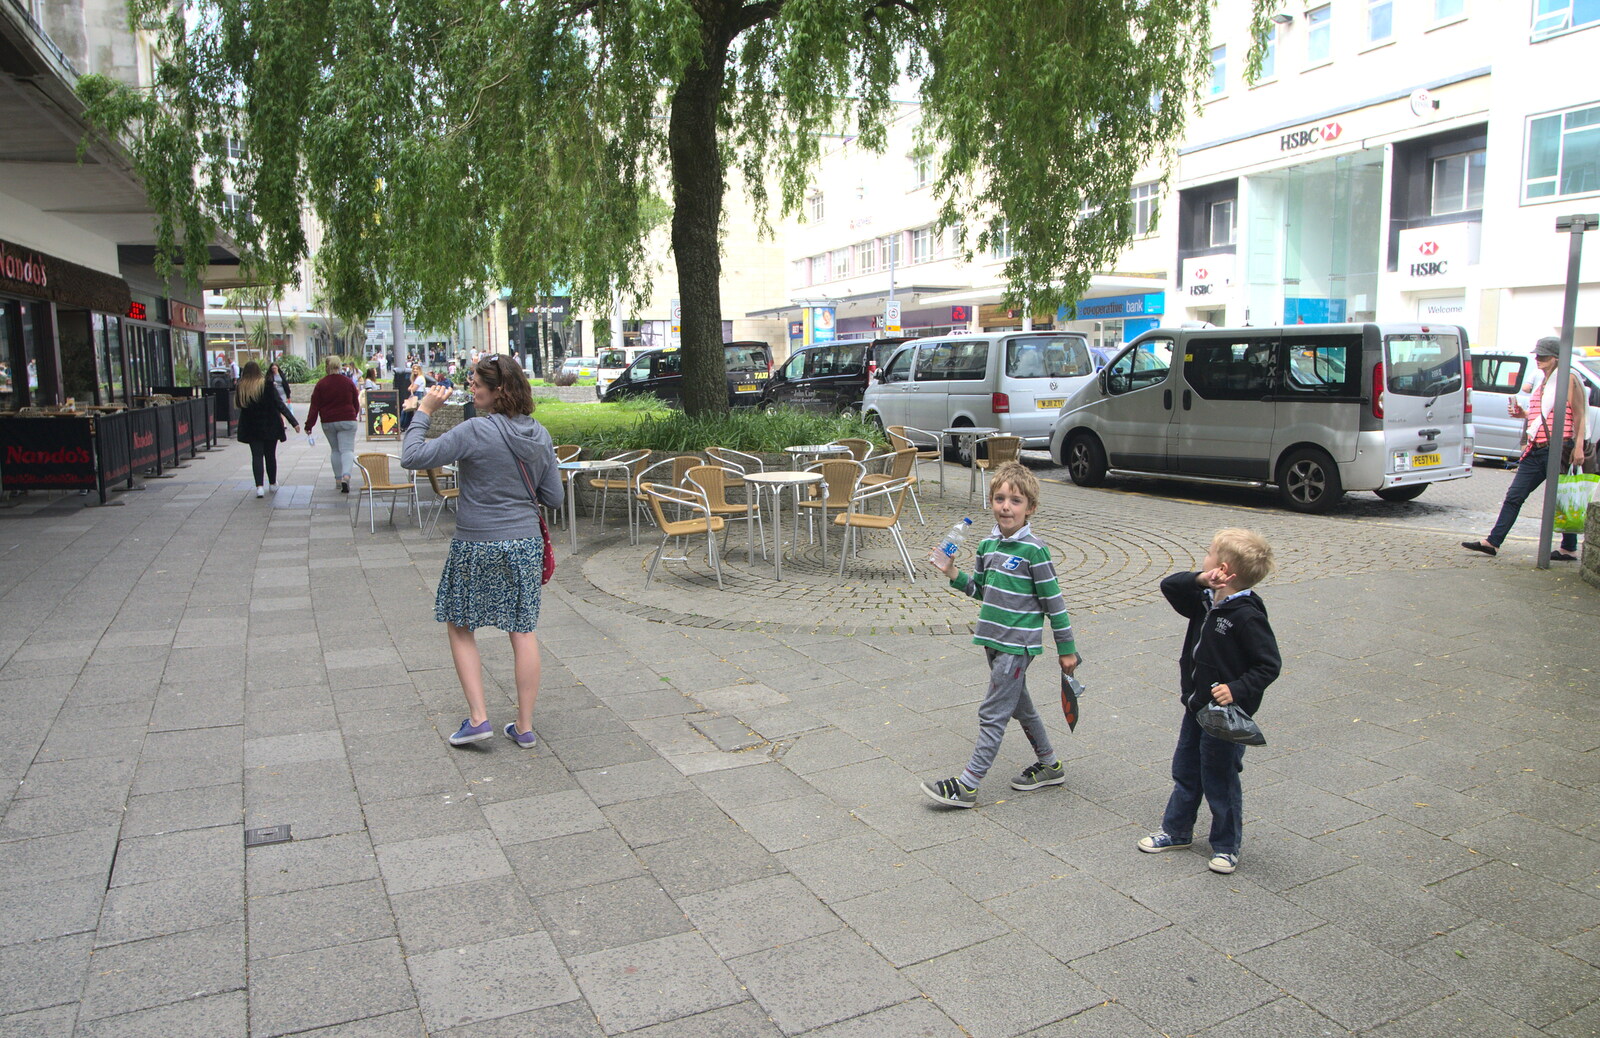 The boys on Old Town Street from A Tamar River Trip, Plymouth, Devon - 30th May 2016